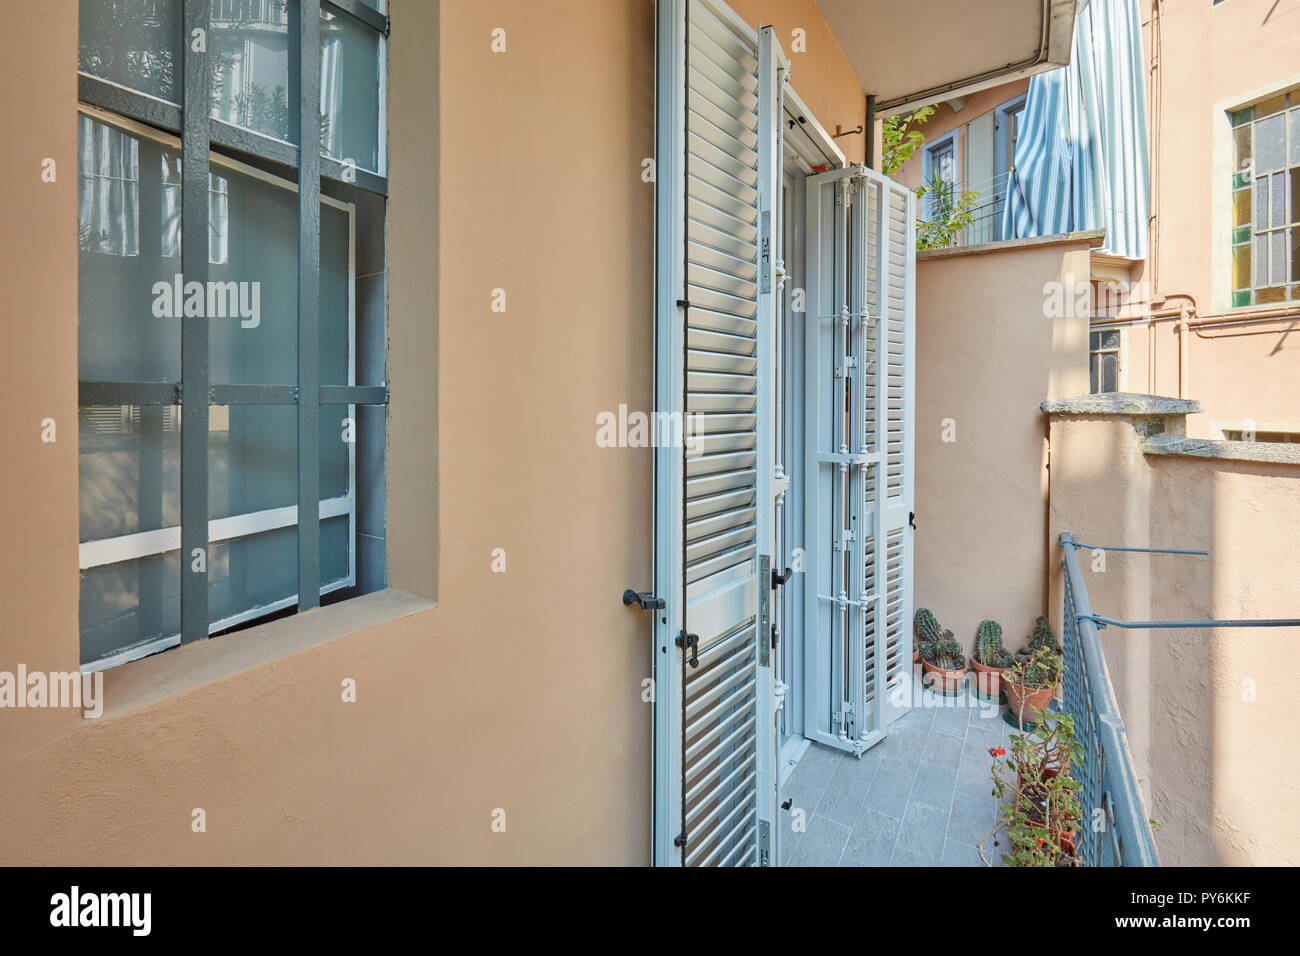 Balcony with gray floor and new blind and railings Stock Photo